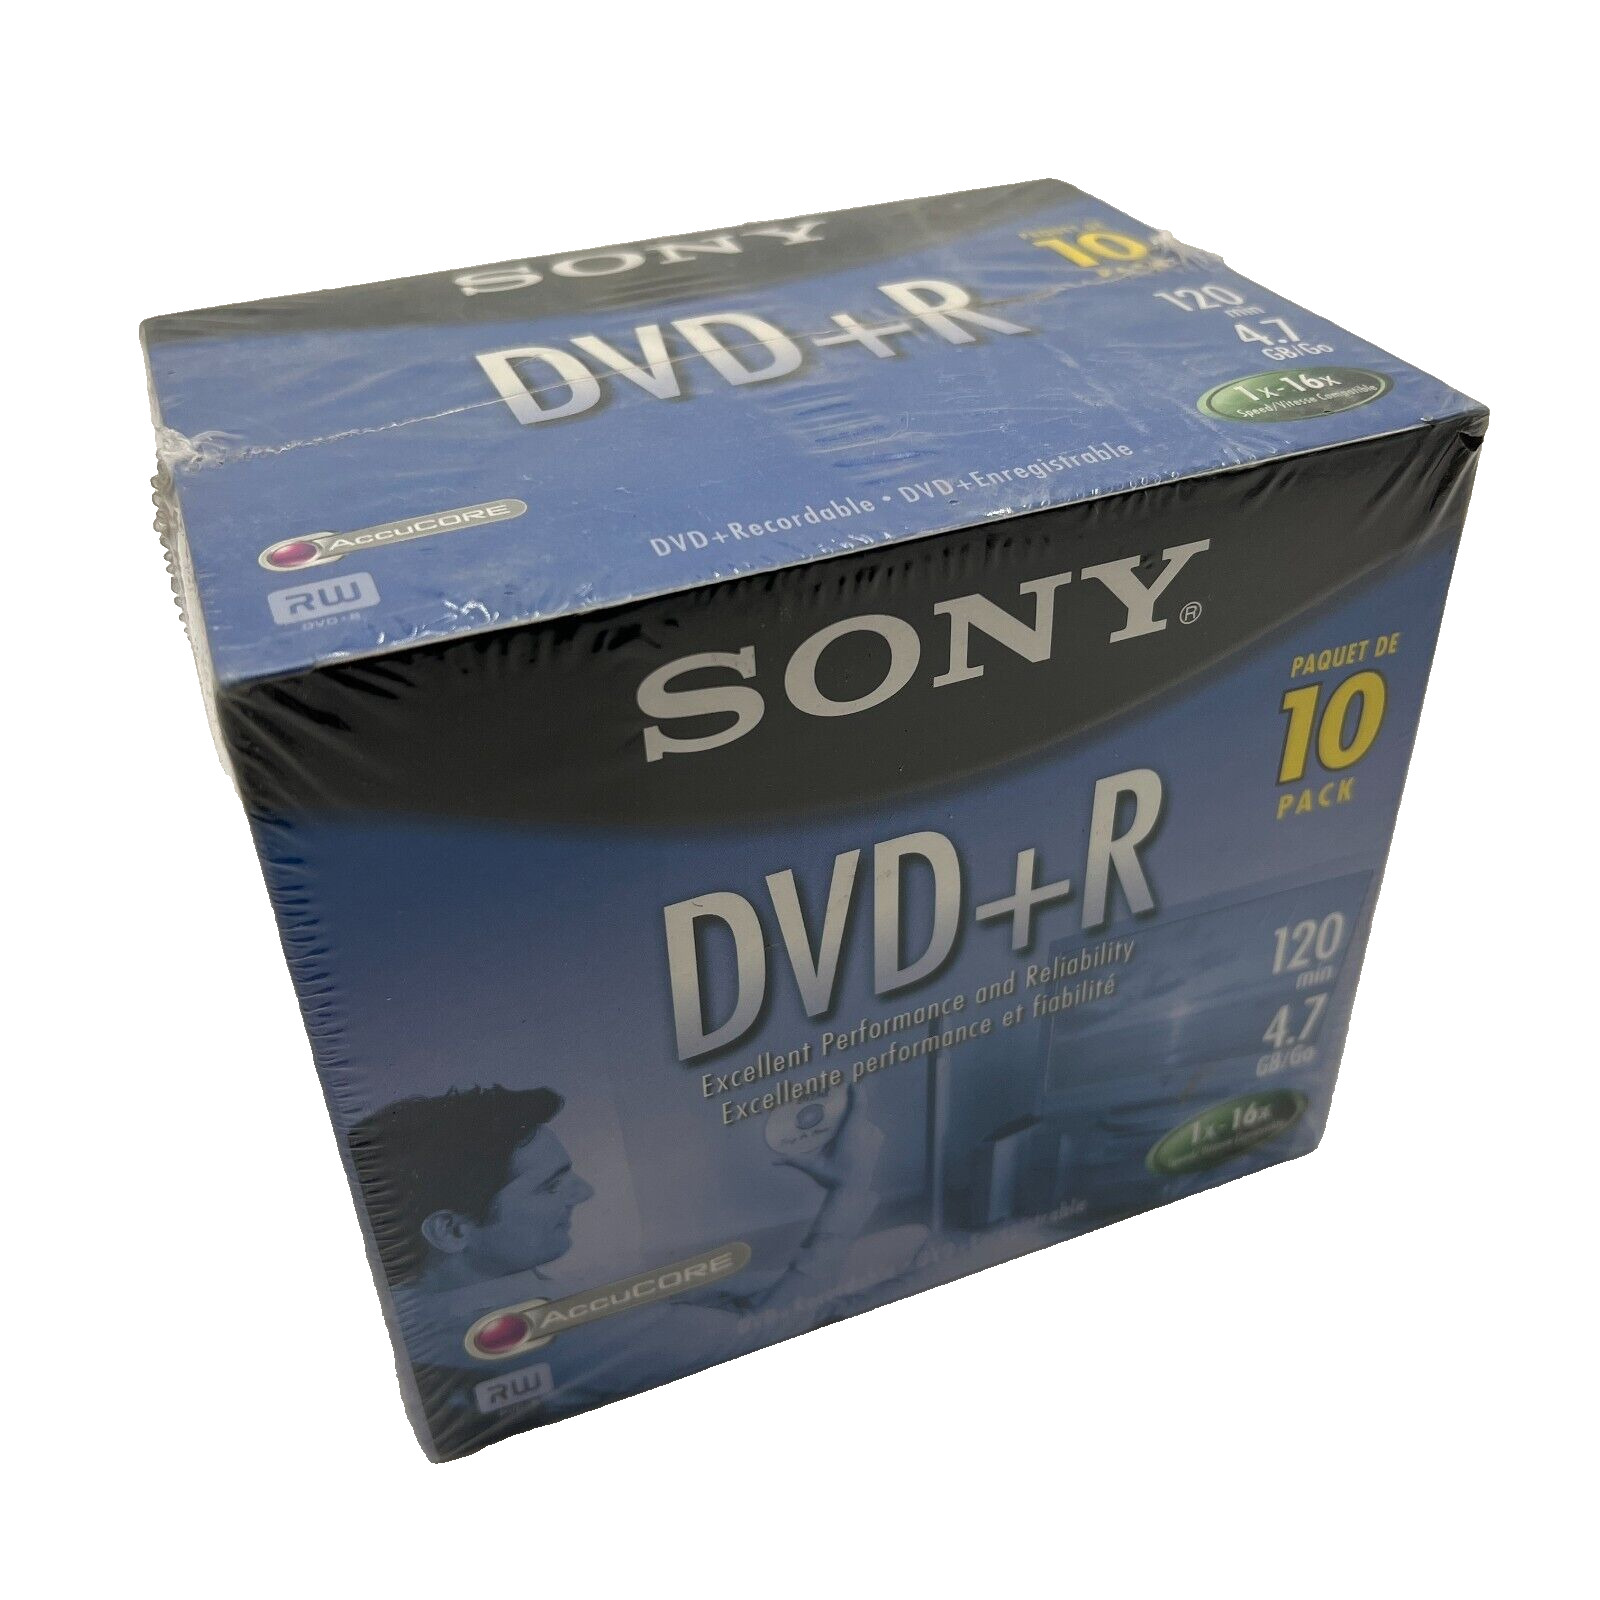 Sony DVD + R 10 Pack Recordable Discs 120 min 4.7 GB Blank New Sealed